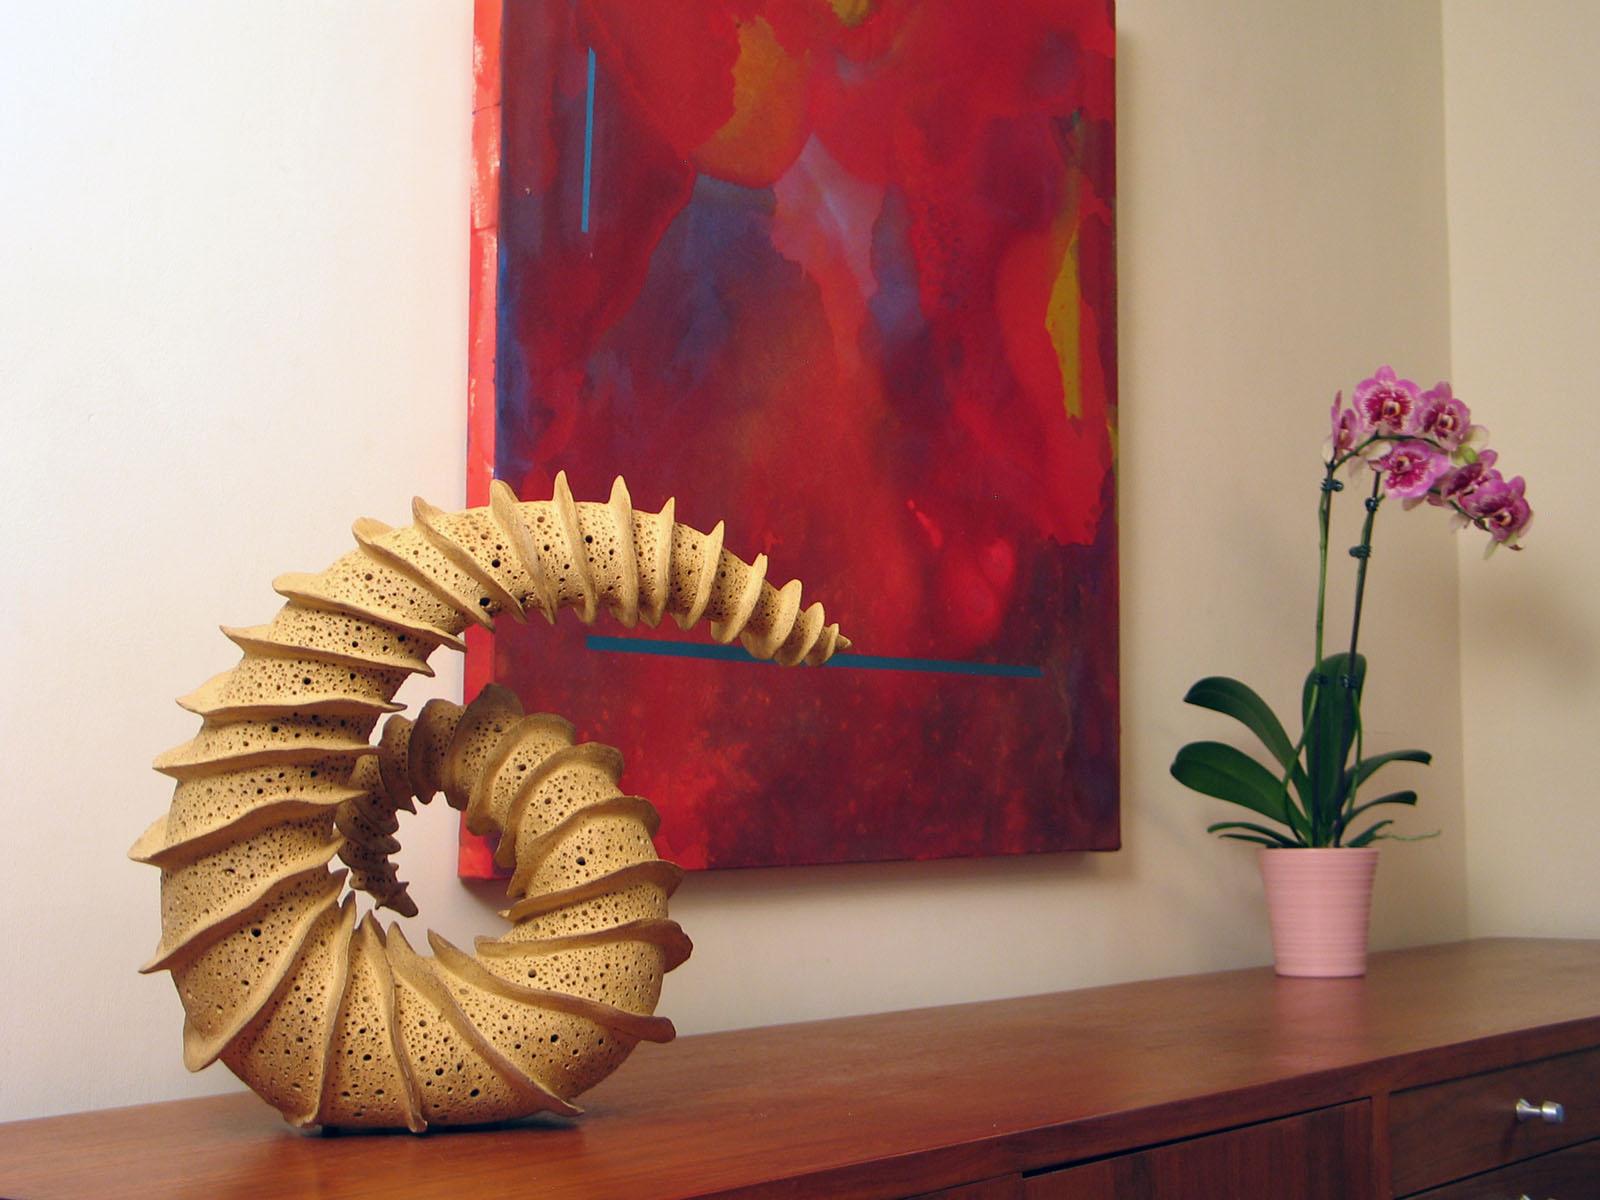  “Looking Back”,  radiates fins spiraling around a tapering coiled ceramic form - Sculpture by Elaine Lorenz